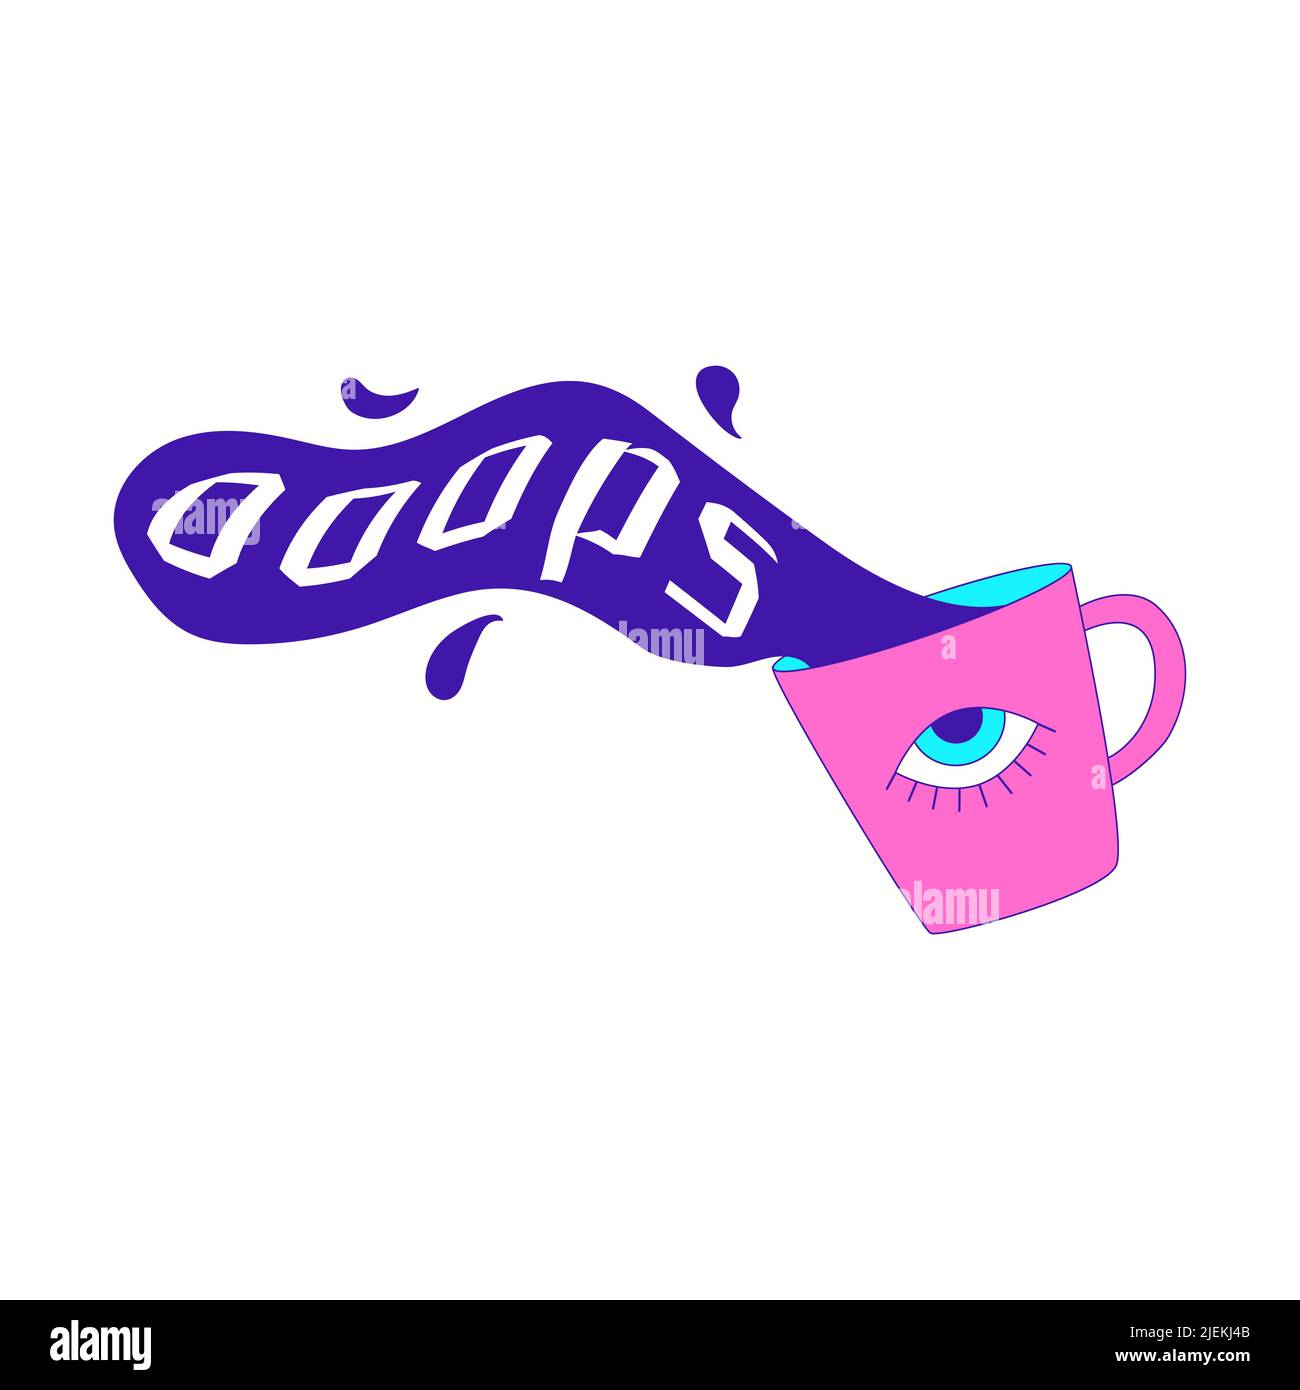 Y2k sticker in shape of mug with a weird eye and a spilling liquid and word Ooops. Text graphic element in bright acid colors. Nostalgia for the 2000s Stock Vector